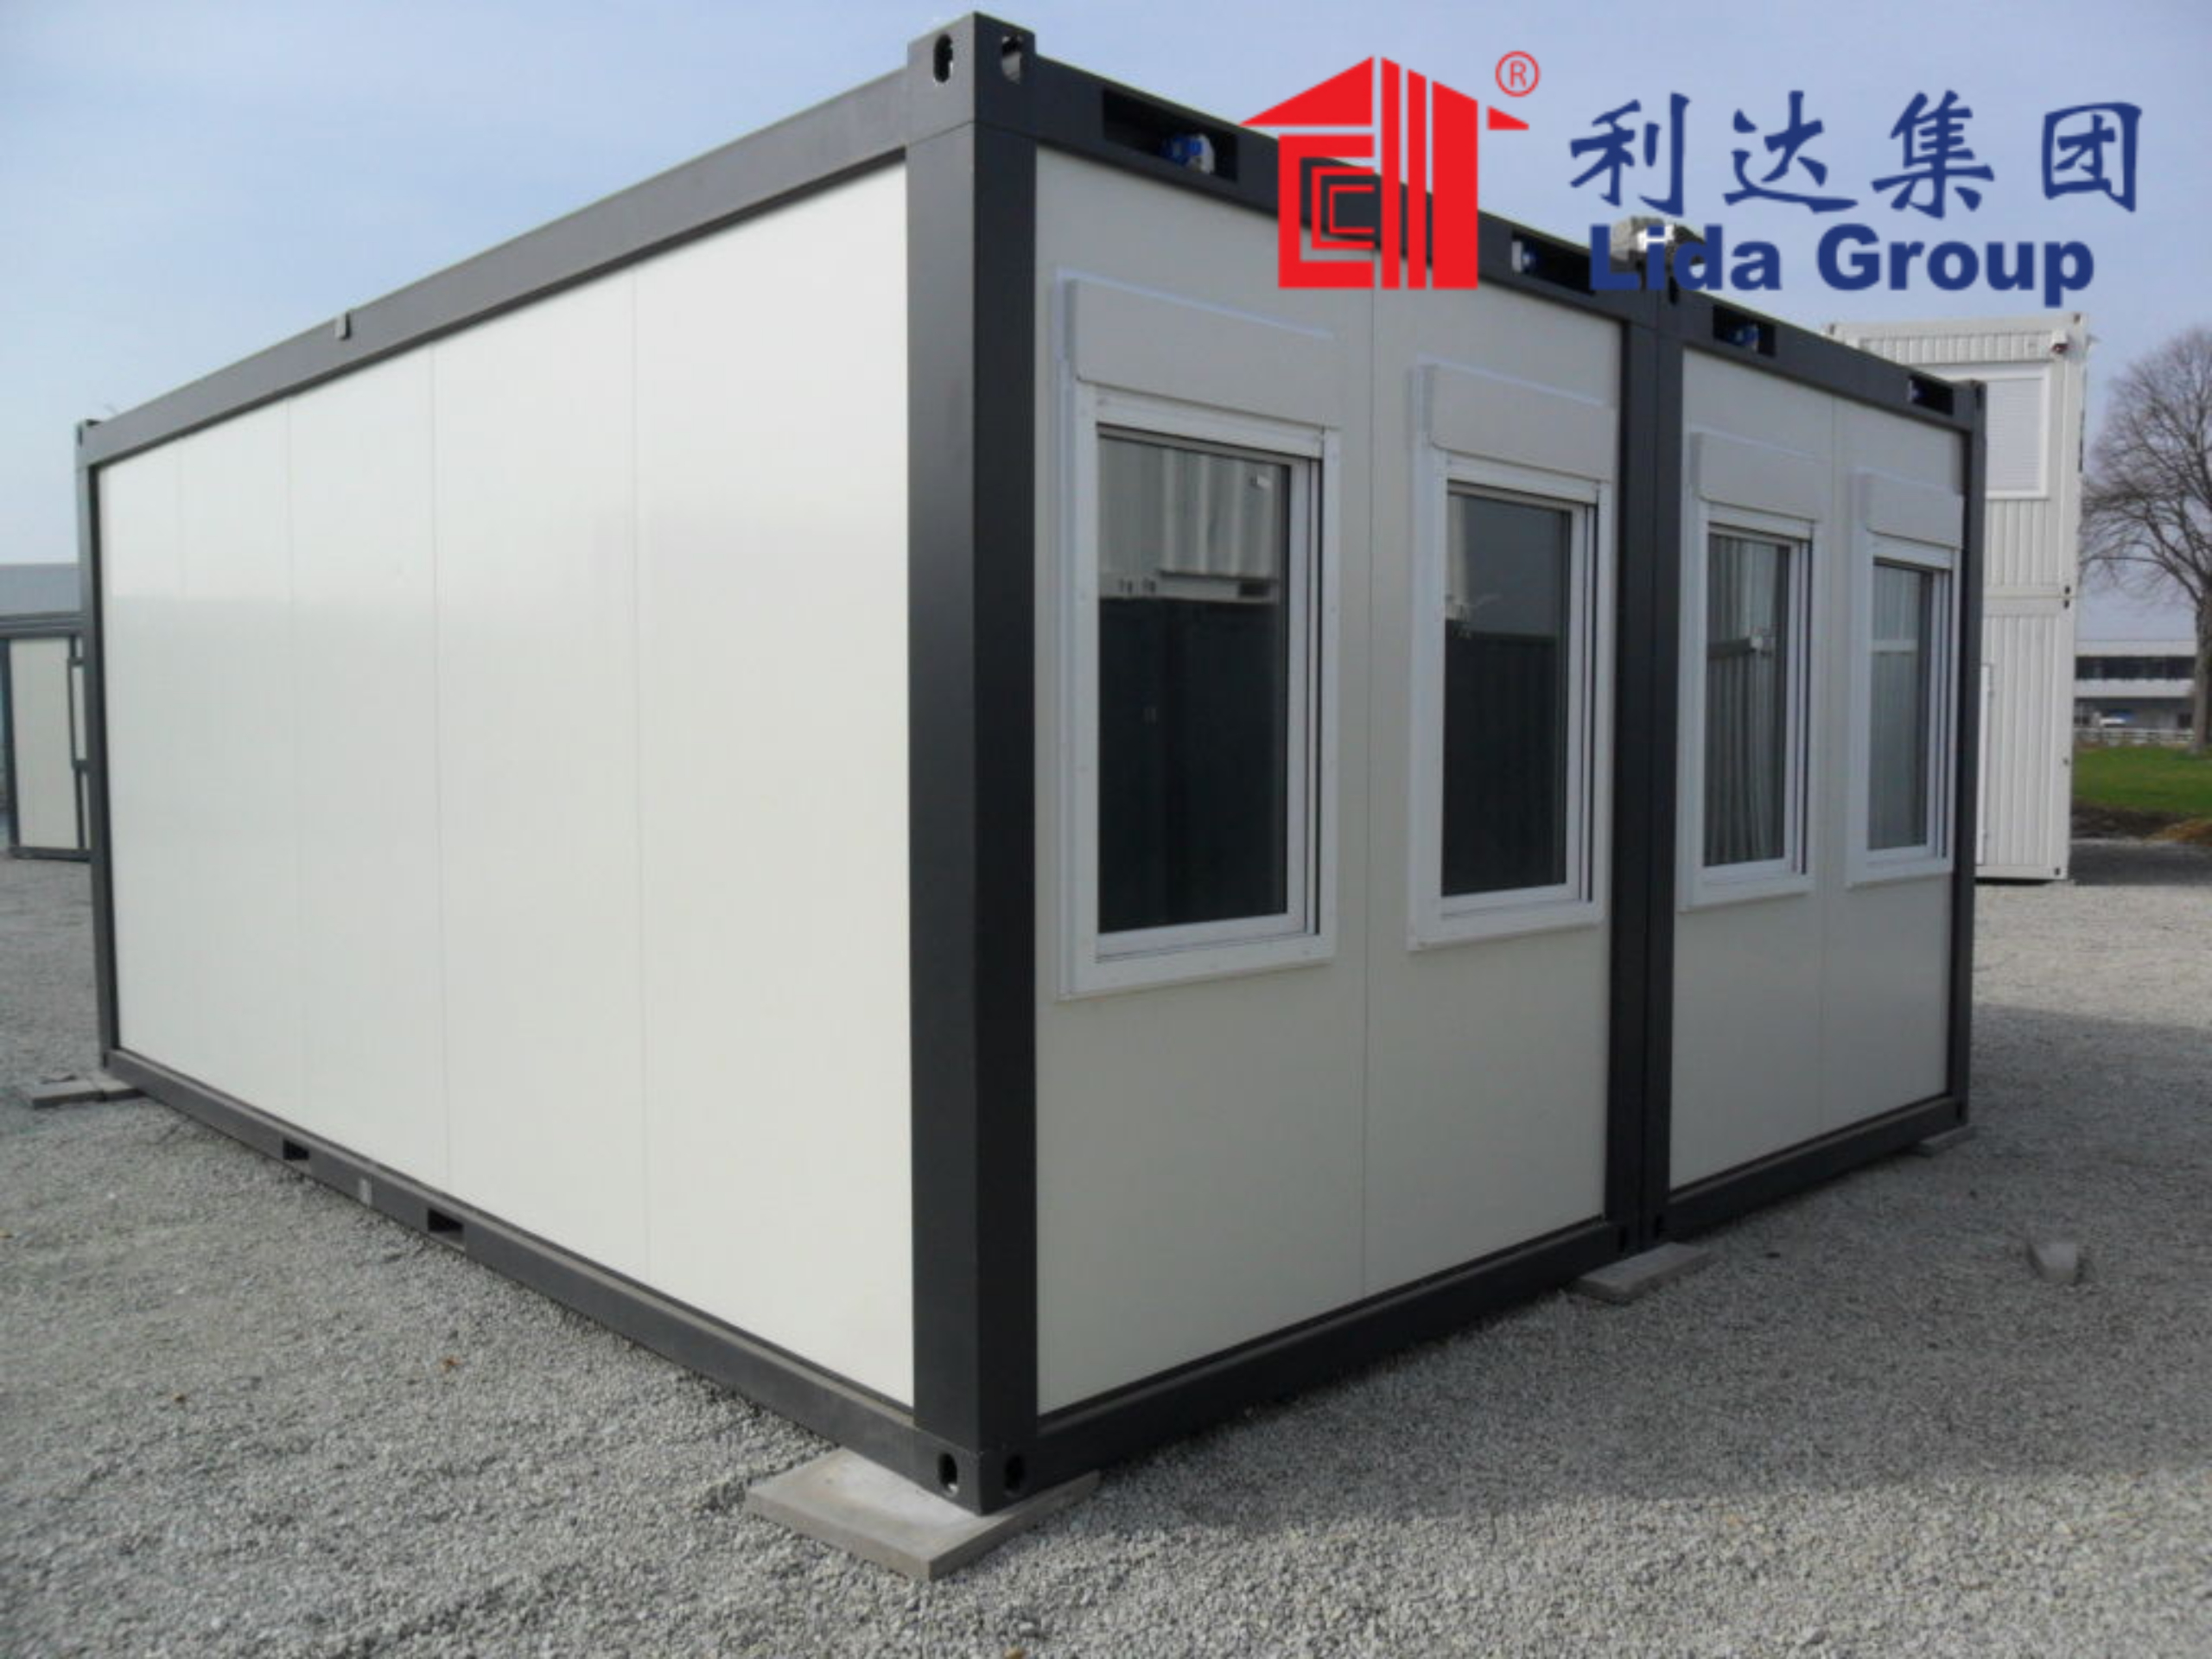 Researchers collaborate with Lida Groupto test new structural engineering and insulation innovations aimed at optimizing container house design for extreme weather resistance and energy efficiency.